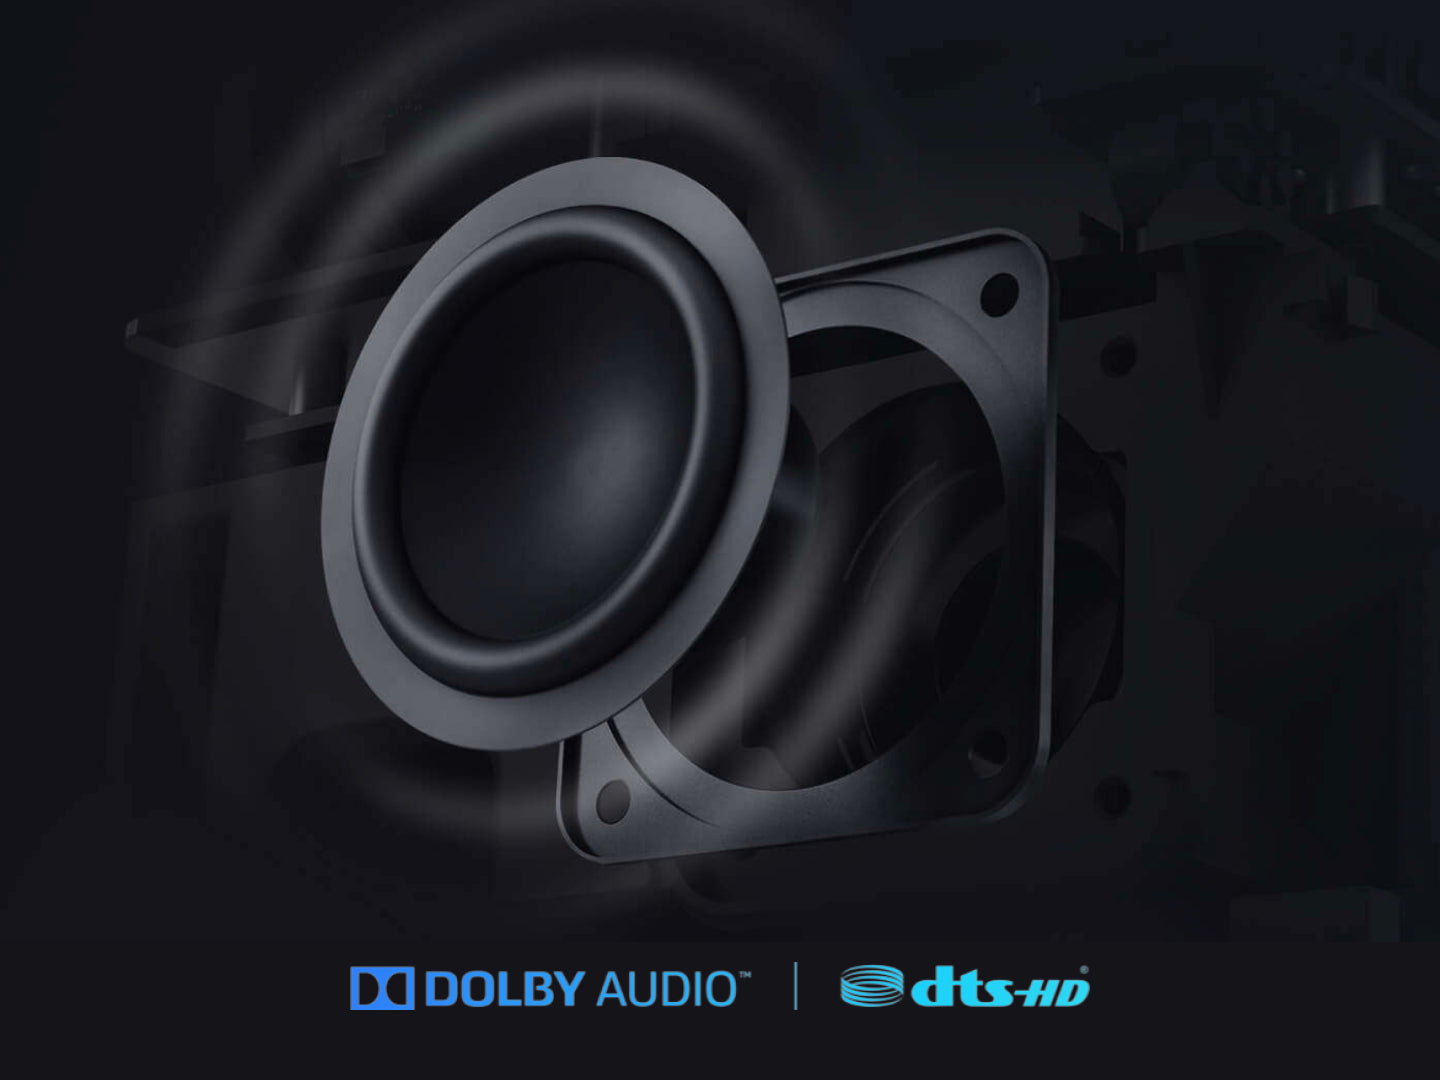 DOLBY AUTIO and DTS-HD